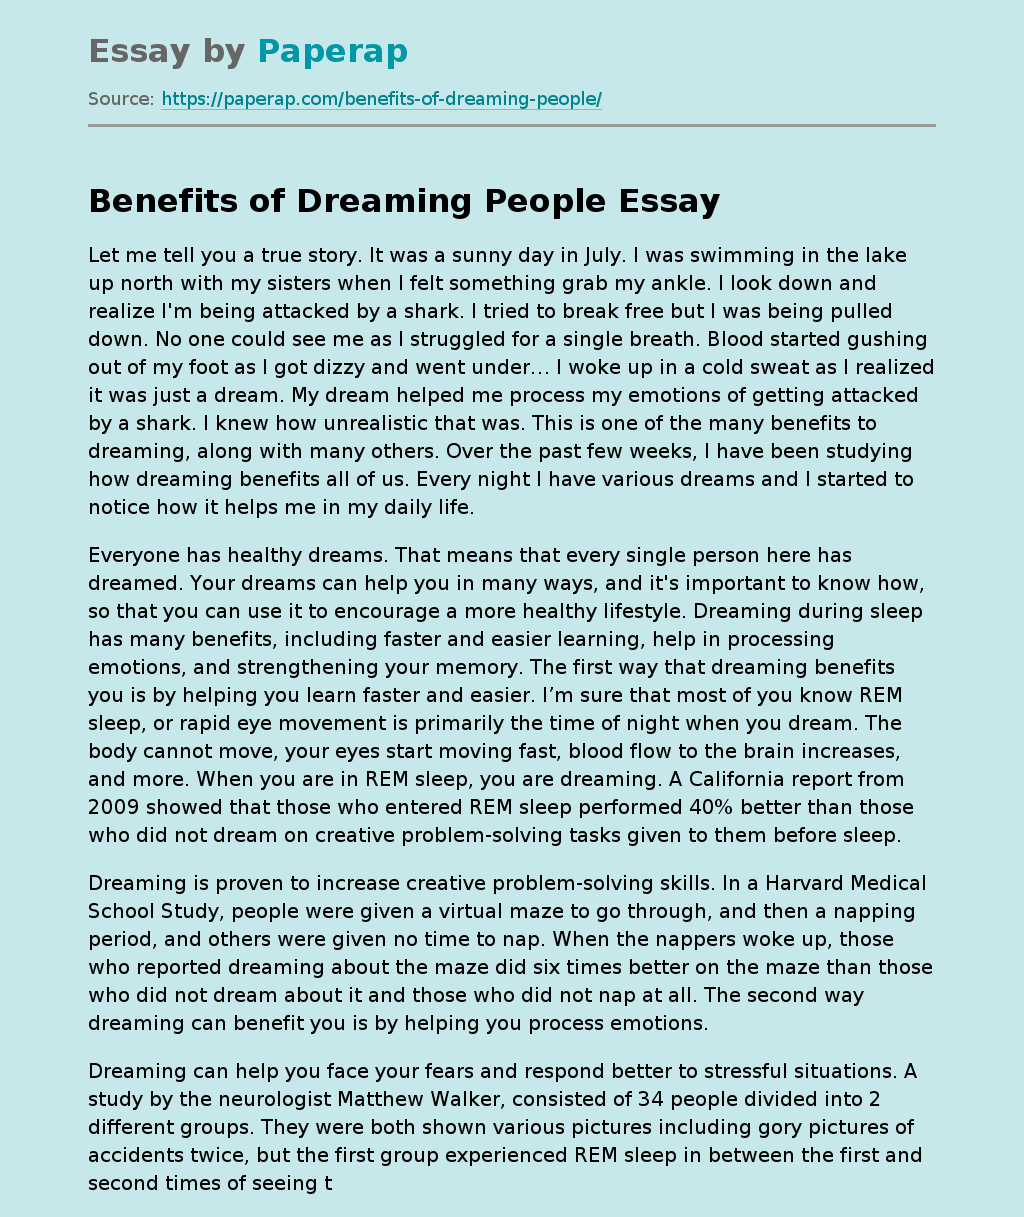 Benefits of Dreaming People